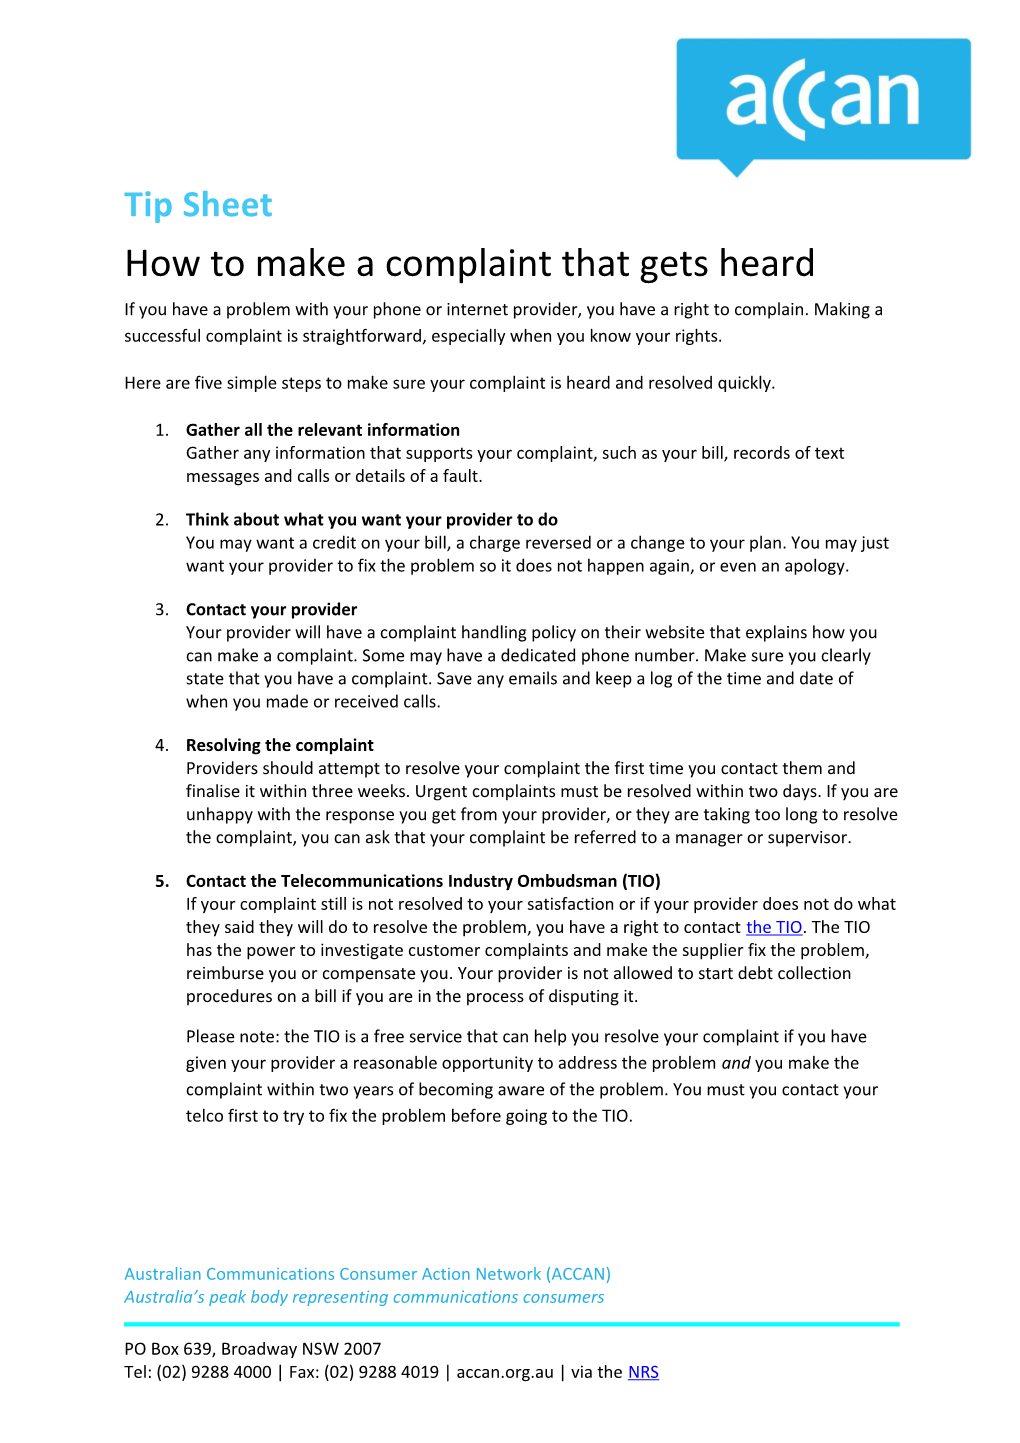 How to Make a Complaint That Gets Heard